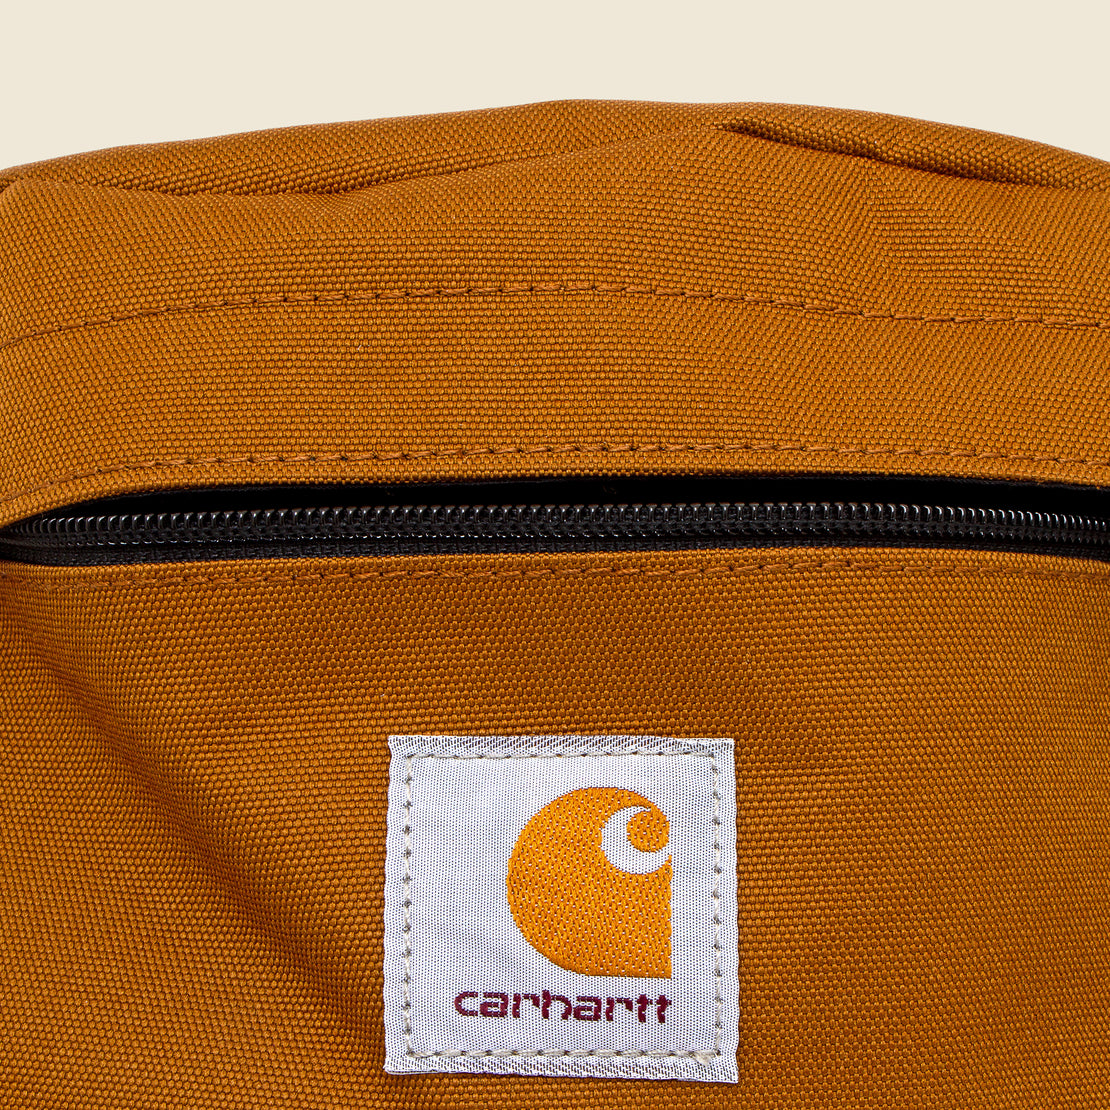 Jake Hip Bag - Hamilton Brown - Carhartt WIP - STAG Provisions - Accessories - Bags / Luggage